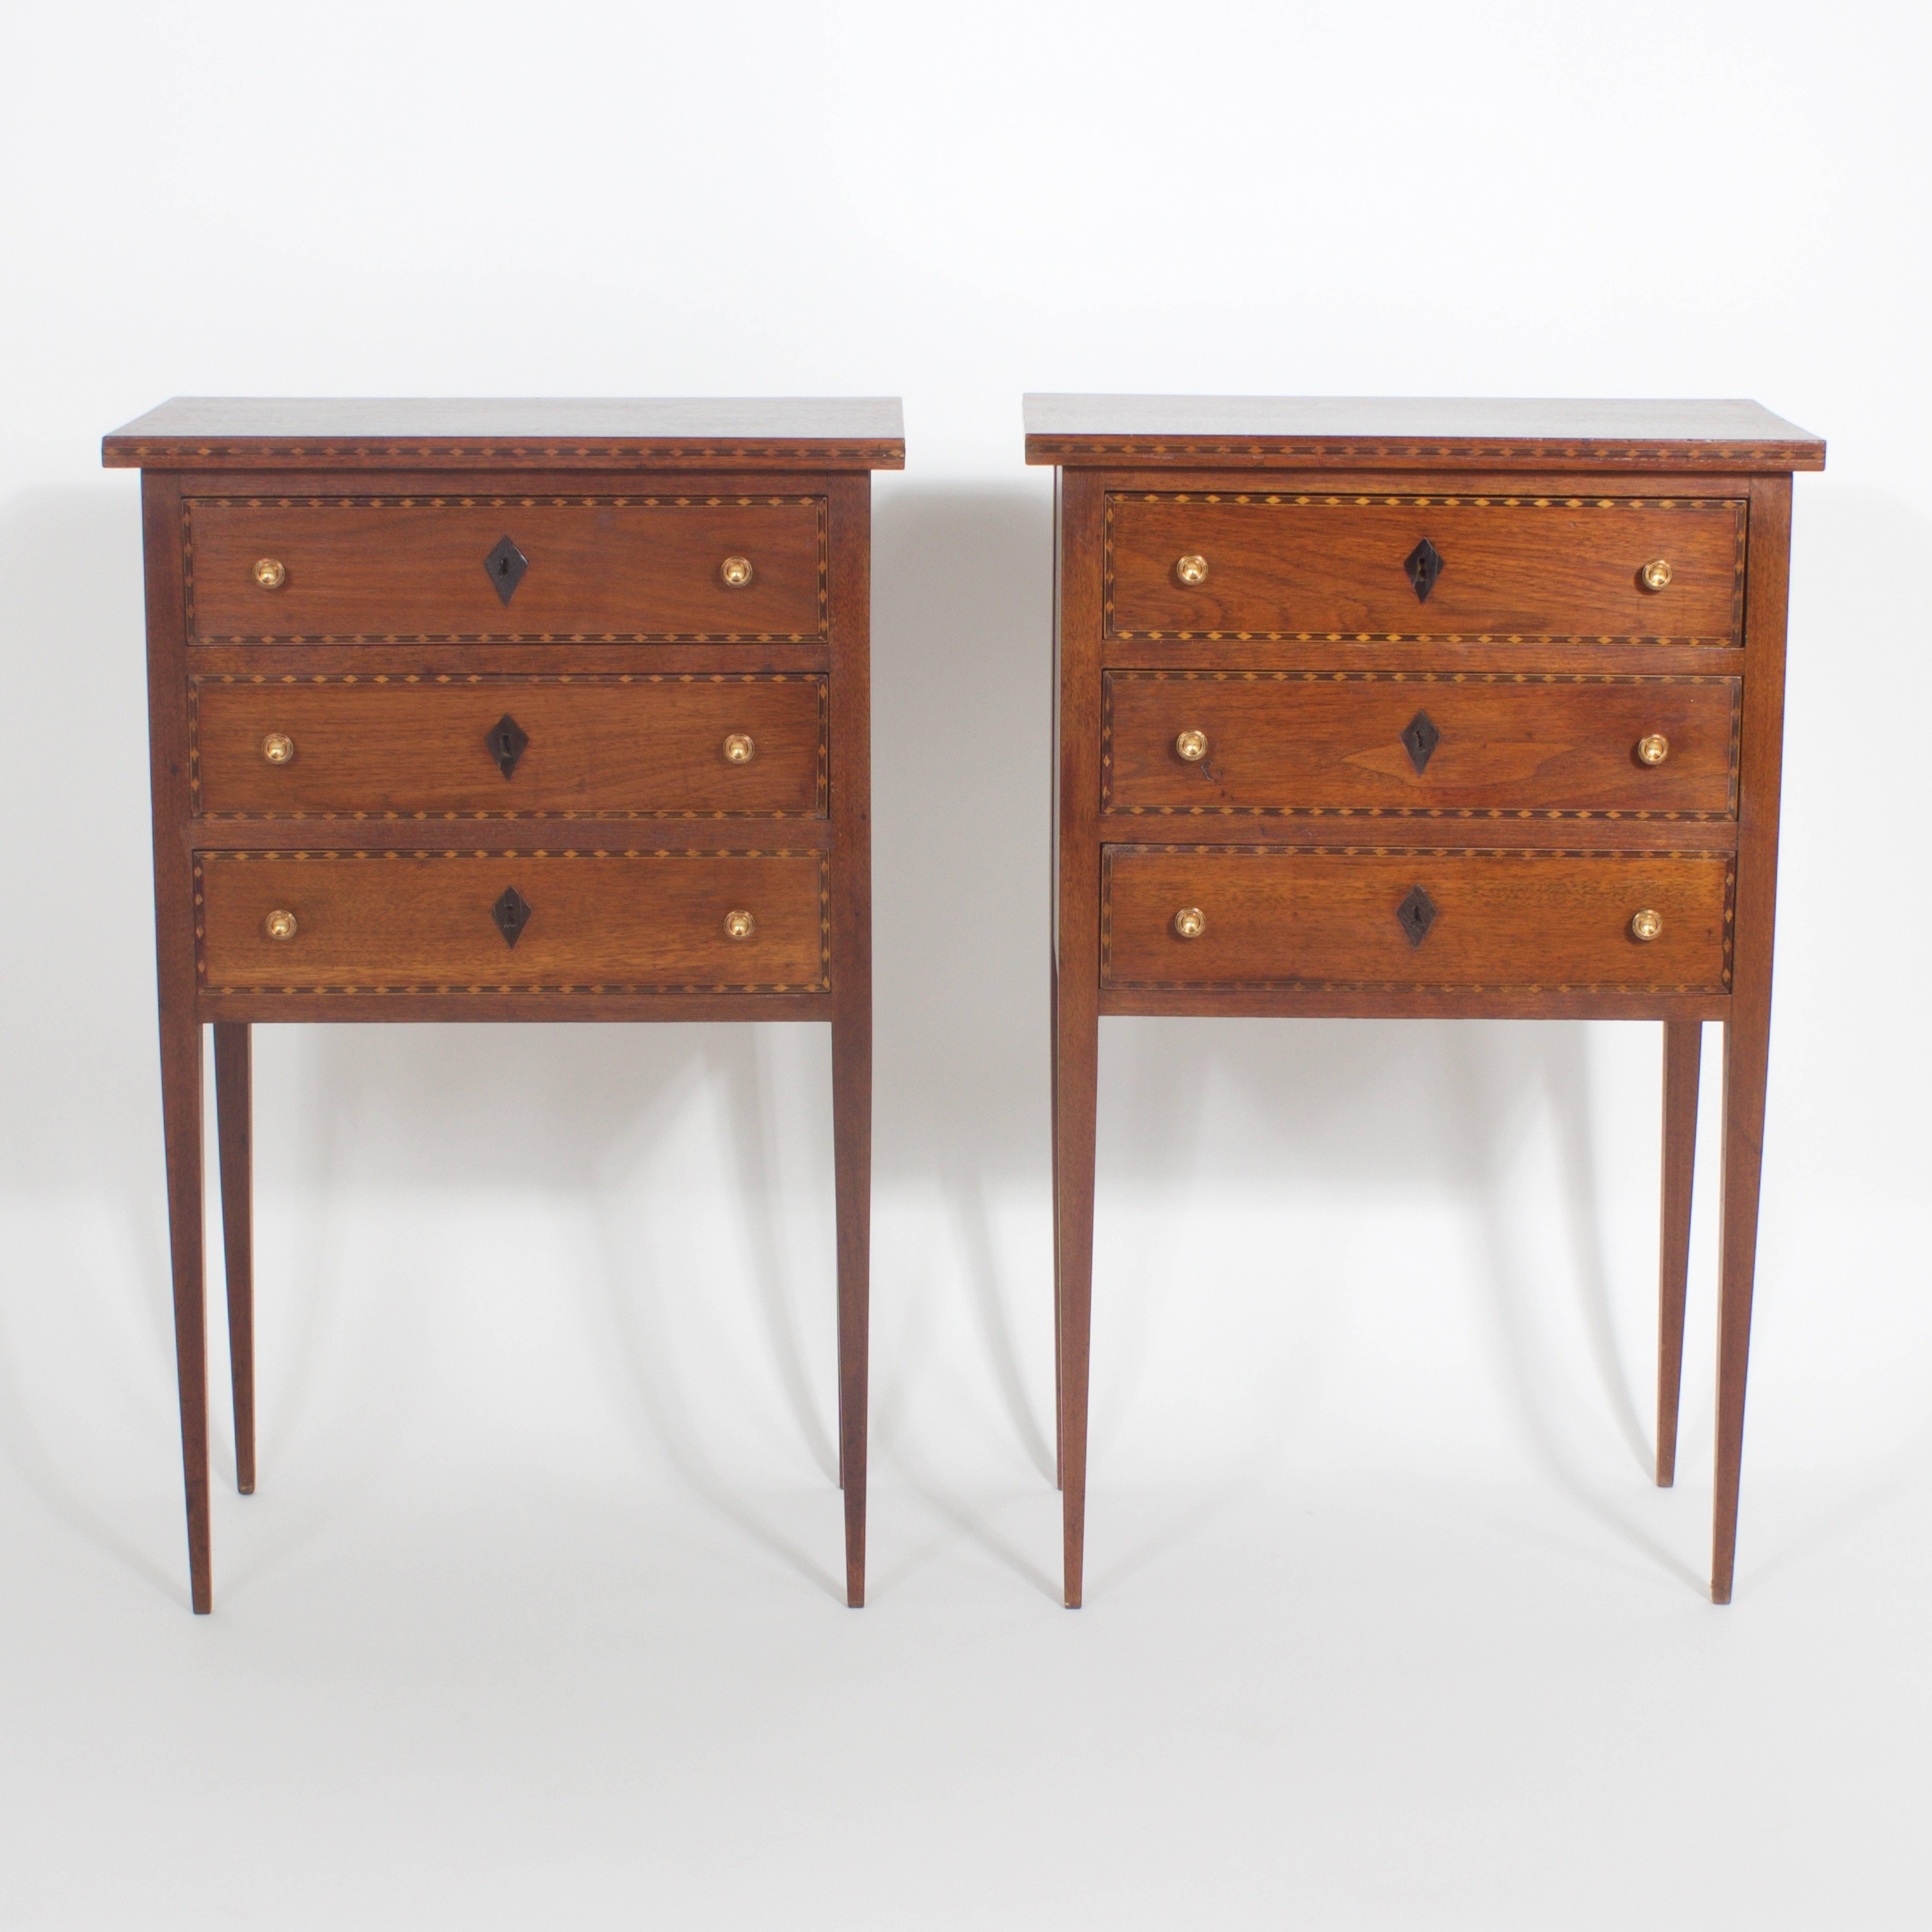 Pair of three Edwardian mahogany nightstands with sophisticated proportions and long elegant legs. Featuring a geometric inlaid band of satinwood and walnut around the top and outlining each drawer. The escutcheons are ebony. Newly polished.